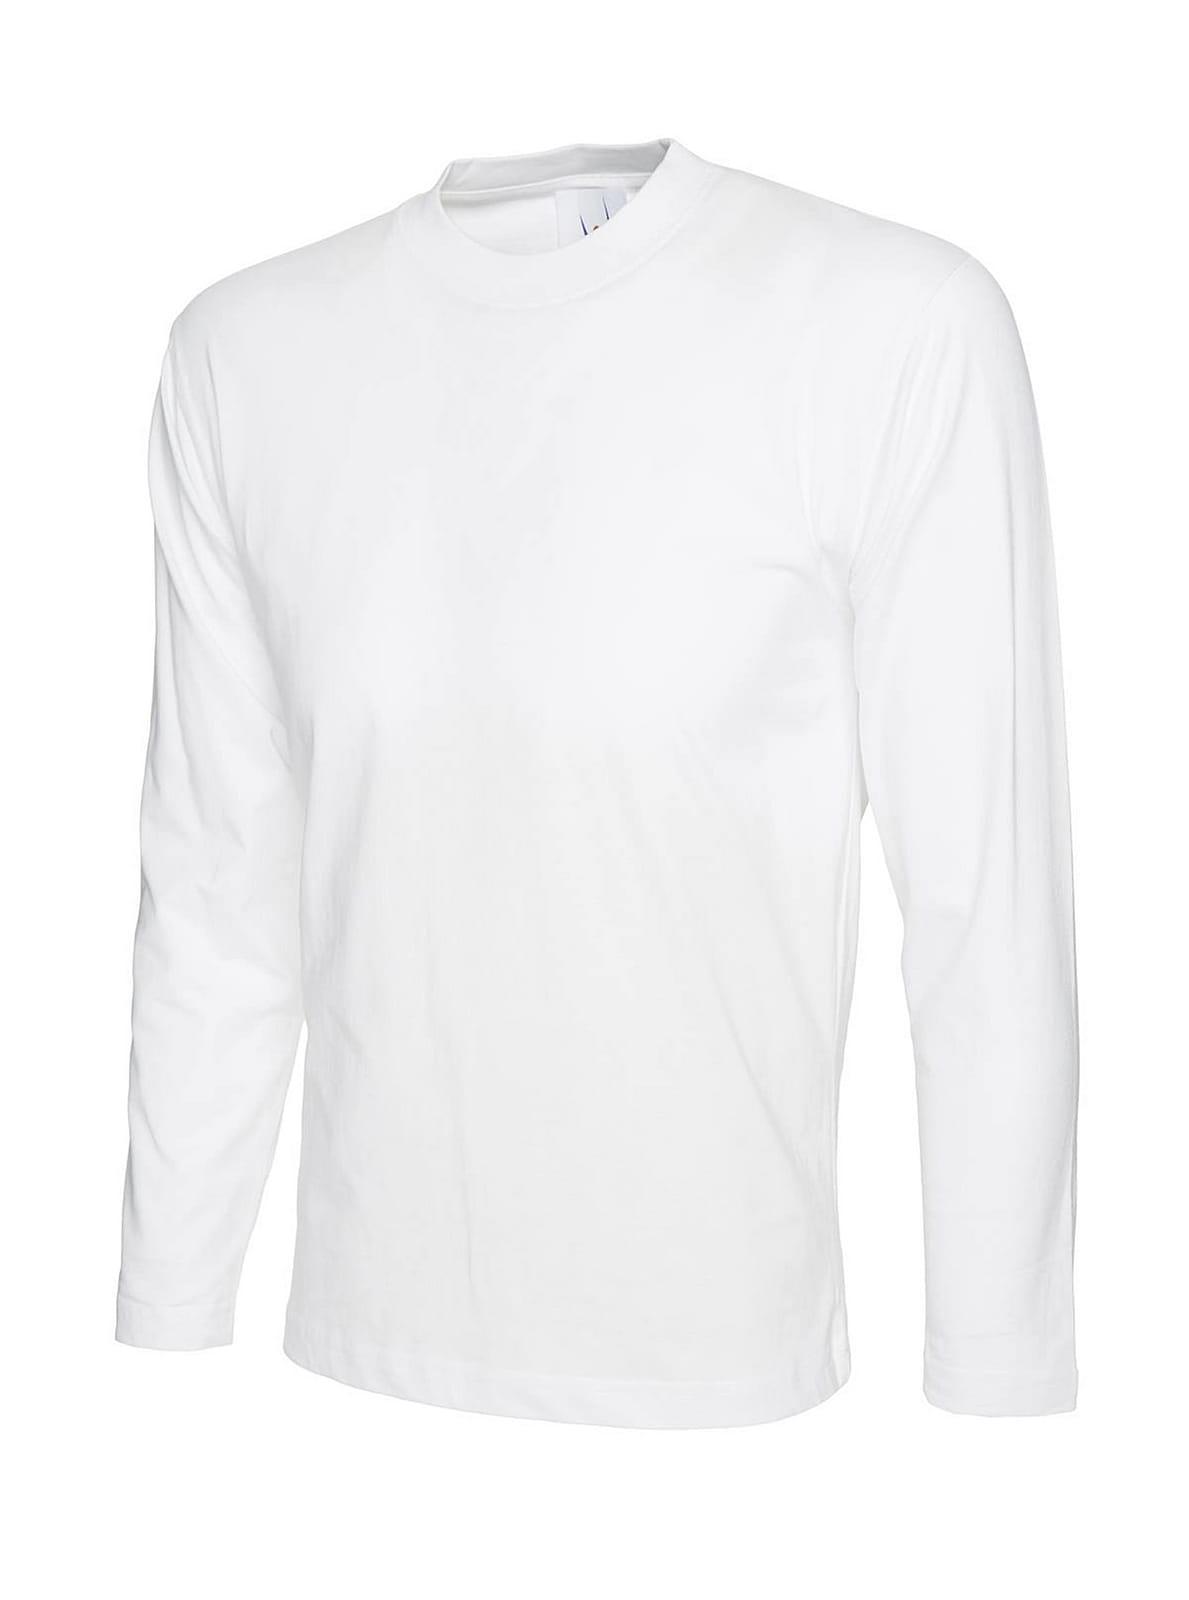 Uneek 180GSM Mens Long-Sleeve T-Shirt in White (Product Code: UC314)